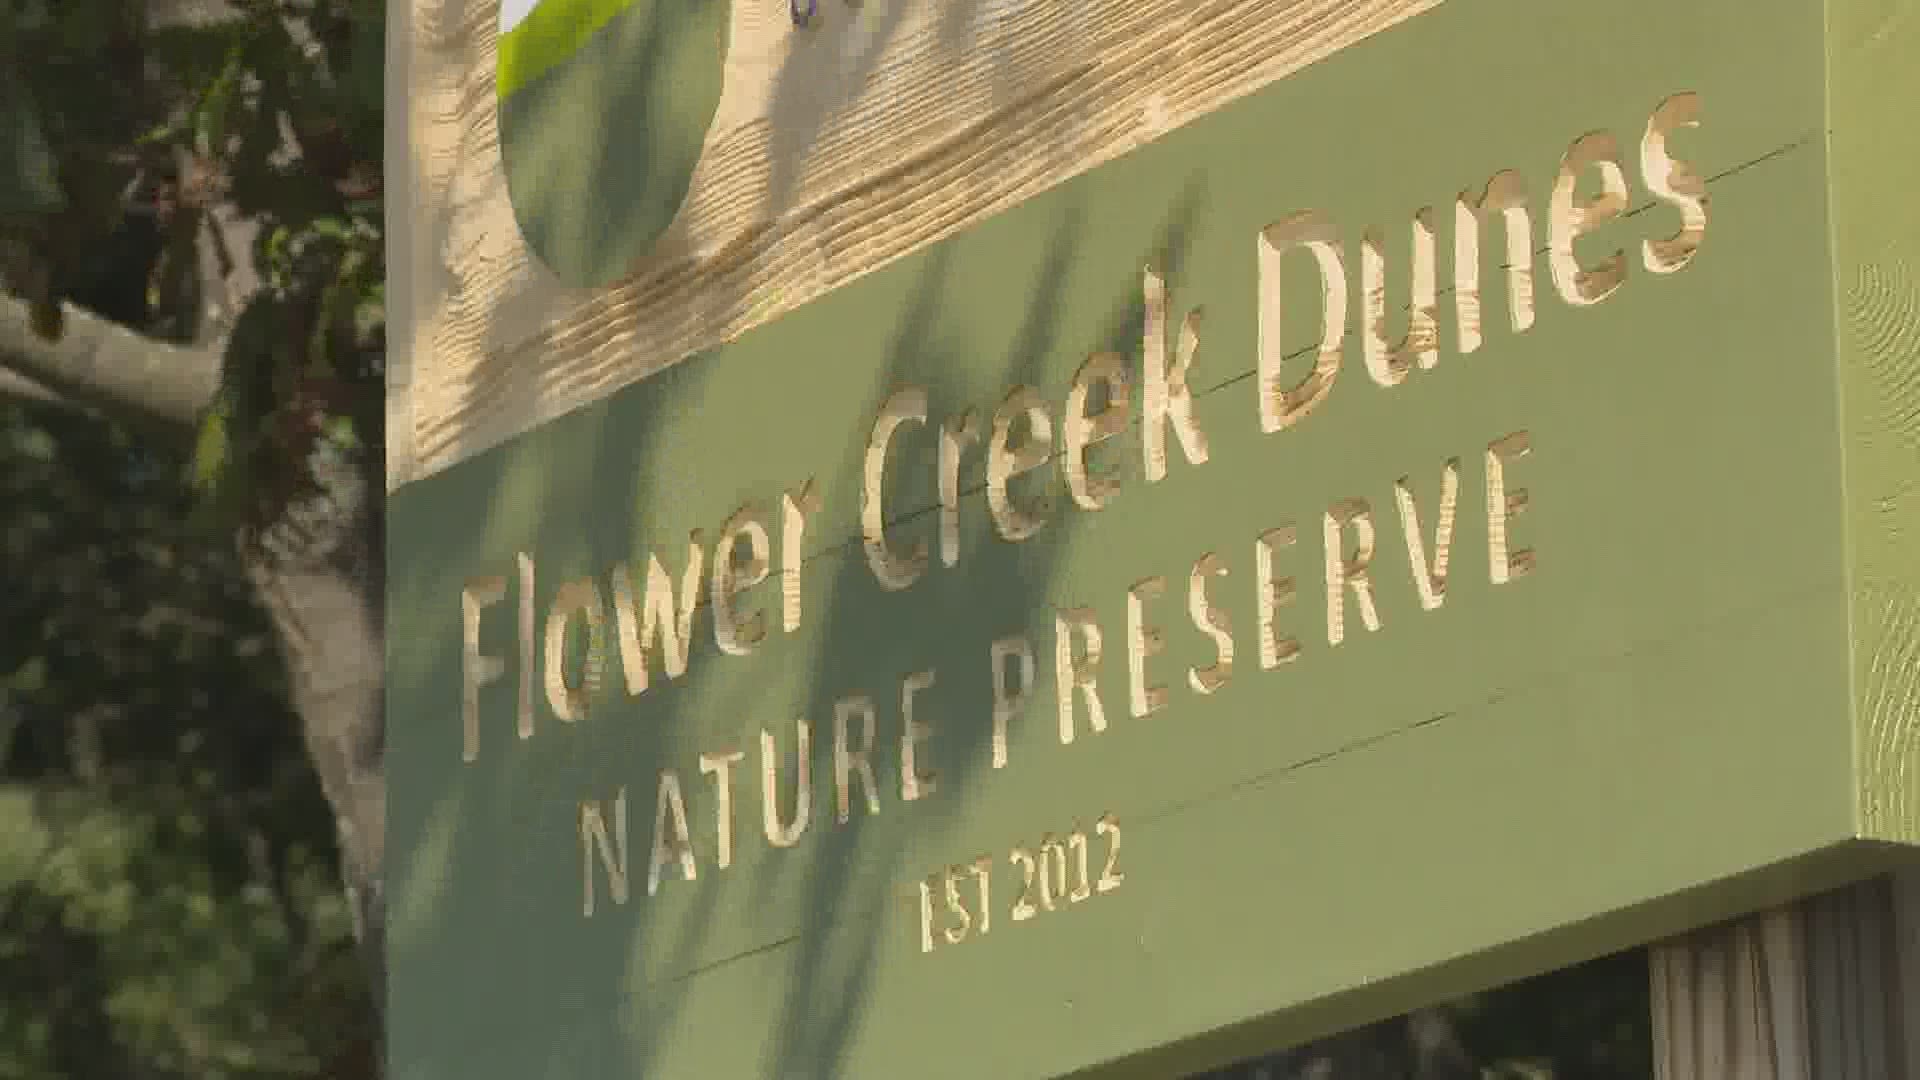 A nature preserve in West Michigan may become bigger very soon.